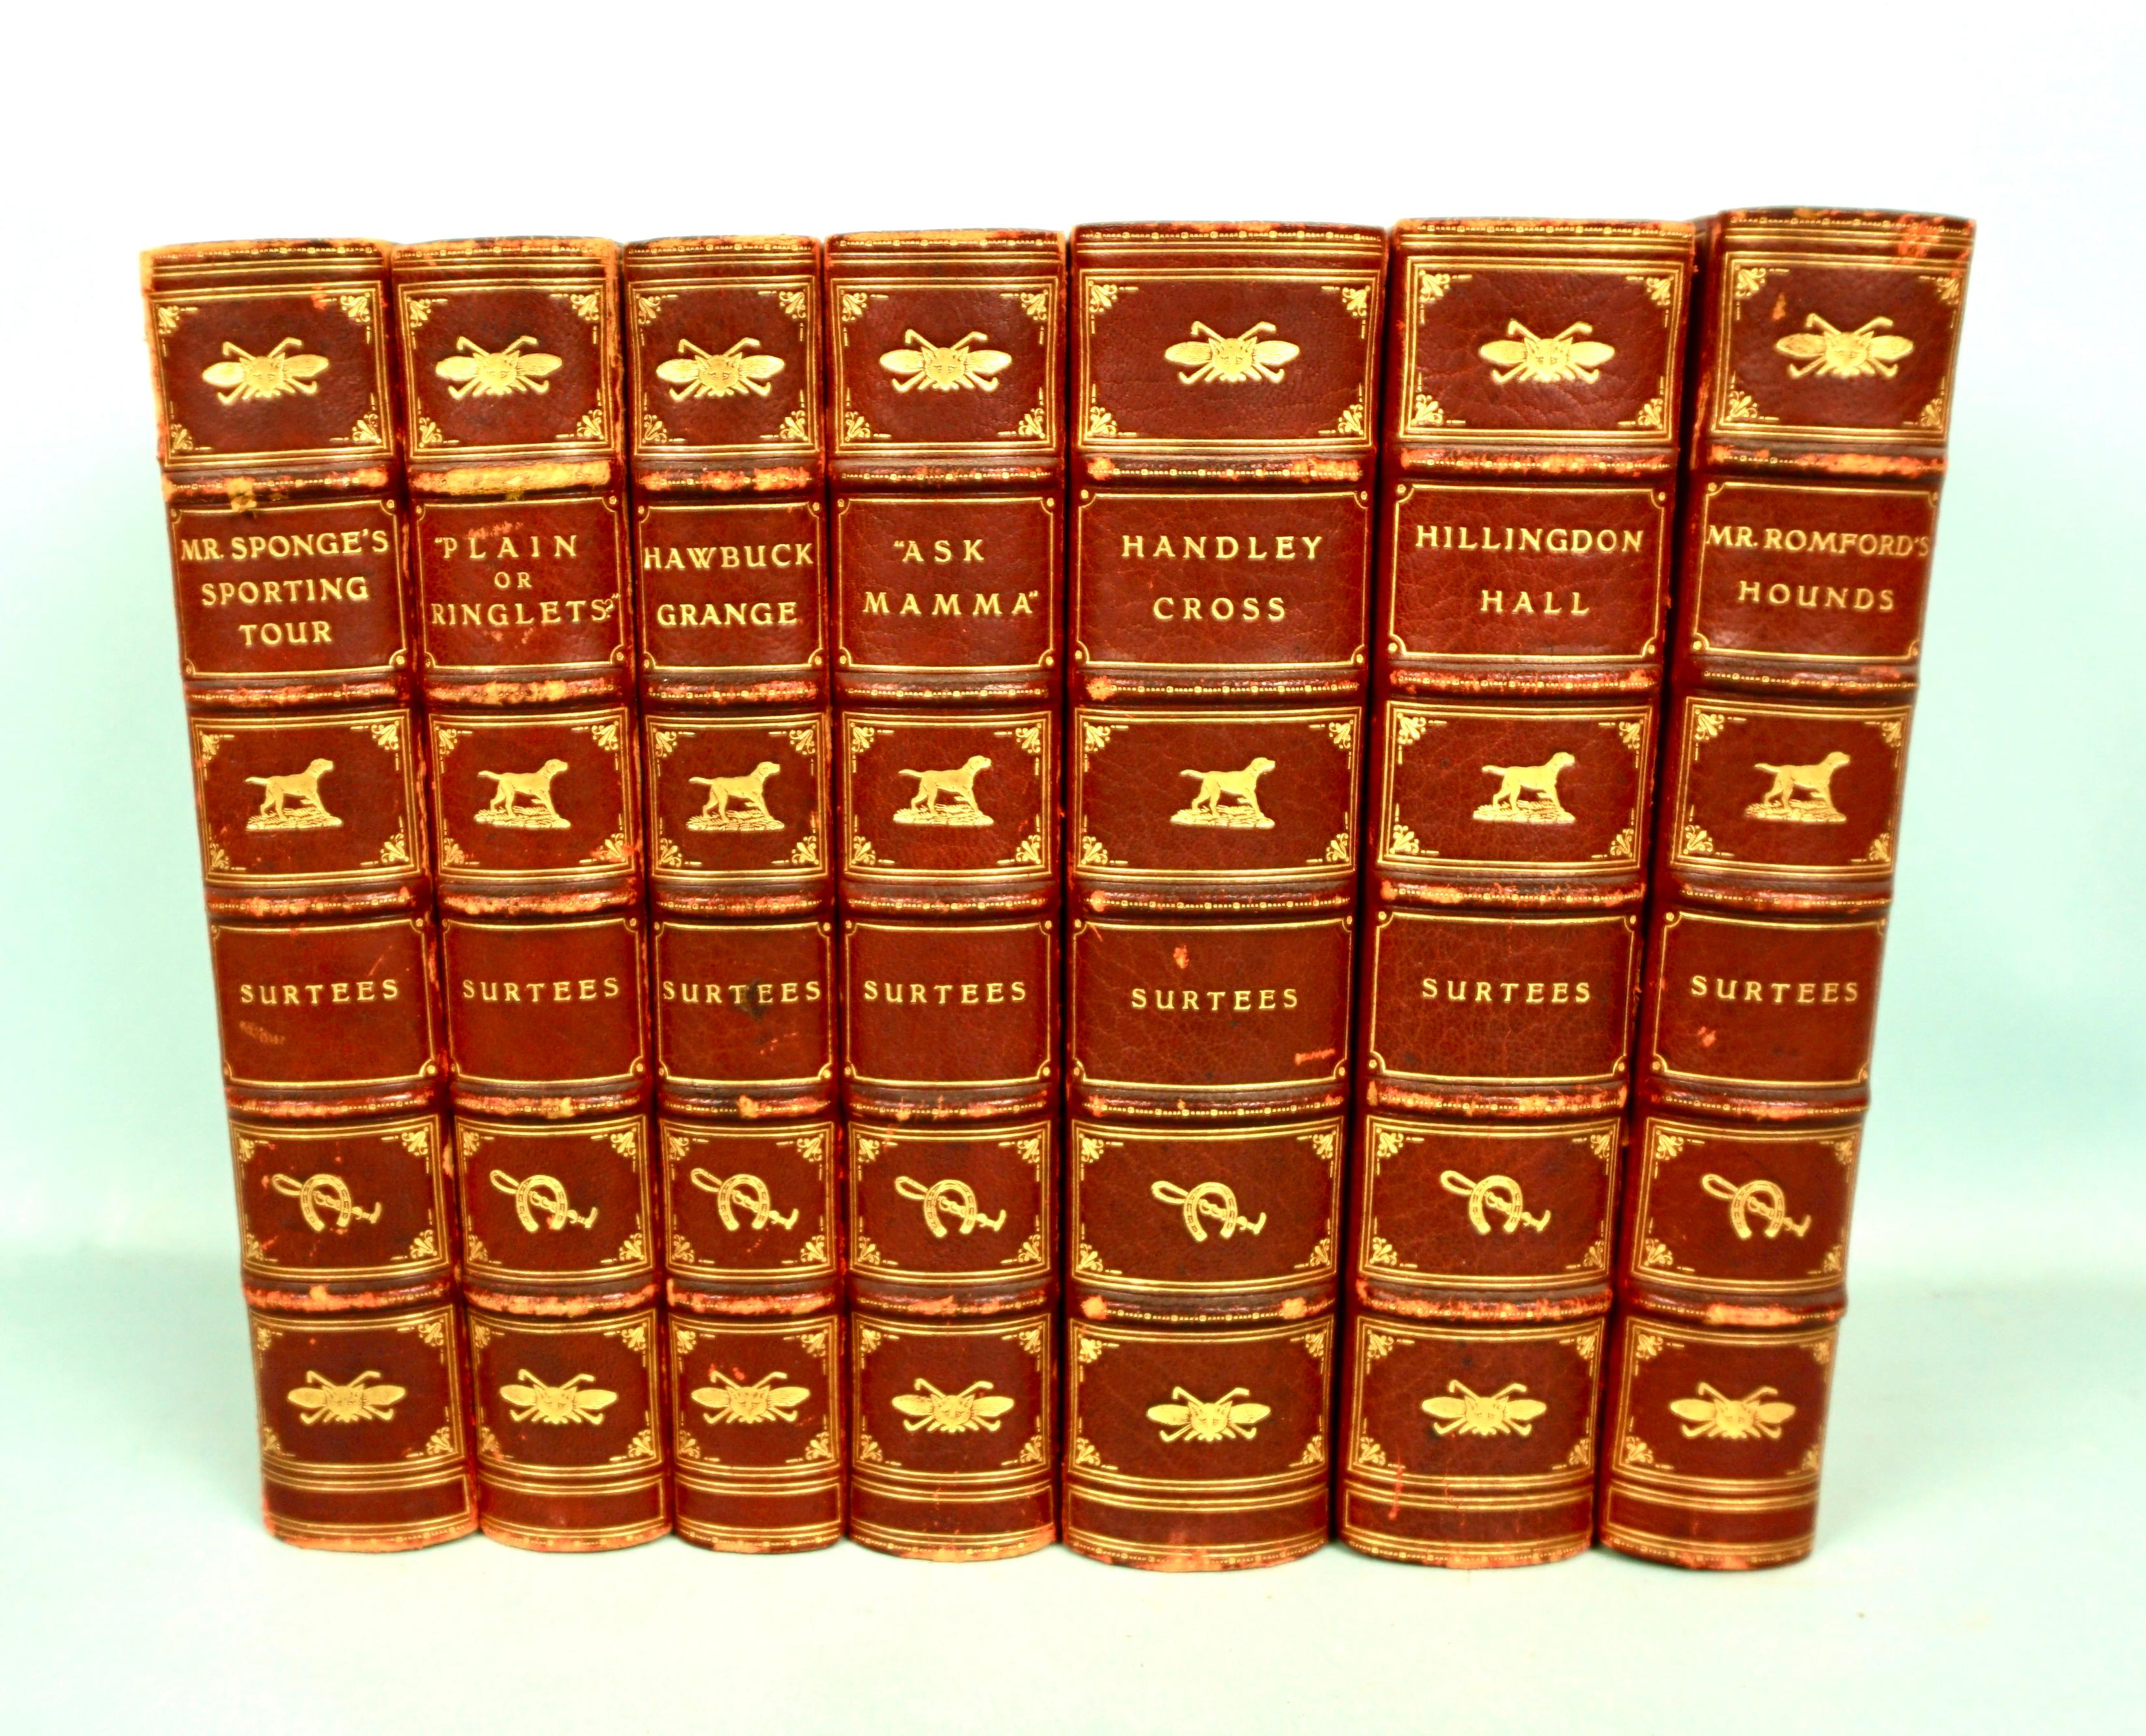 A lovely set of red morocco leather bound volumes by Robert Smith Surtees, a well-known English 19th century novelist and sporting writer born in 1805. Published by Bradbury, Agnew & Co., London. The set is beautifully bound and stamped by the